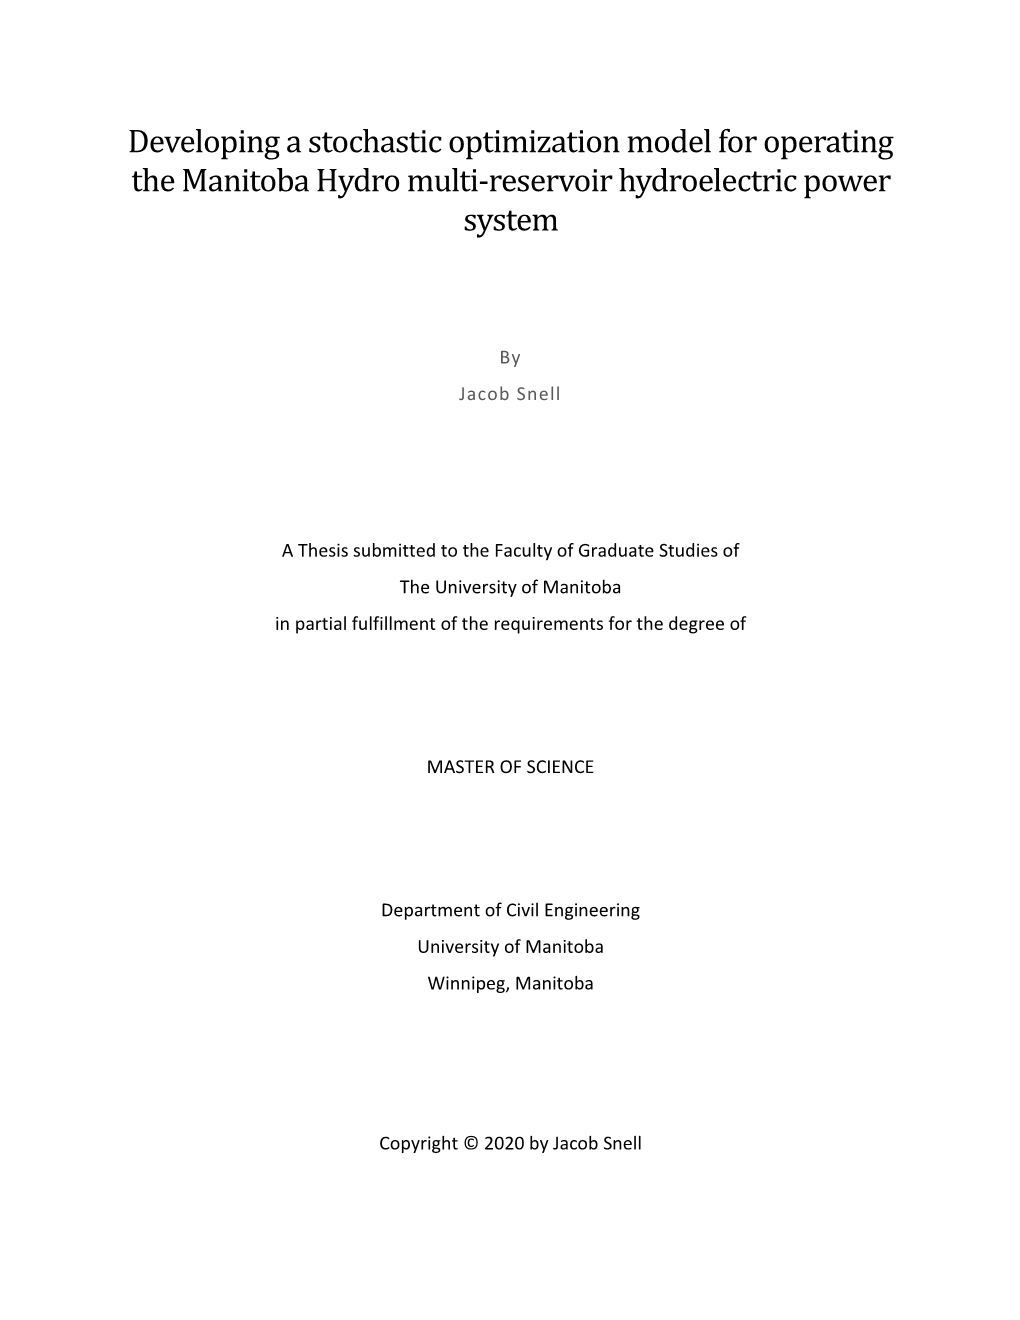 Developing a Stochastic Optimization Model for Operating the Manitoba Hydro Multi-Reservoir Hydroelectric Power System